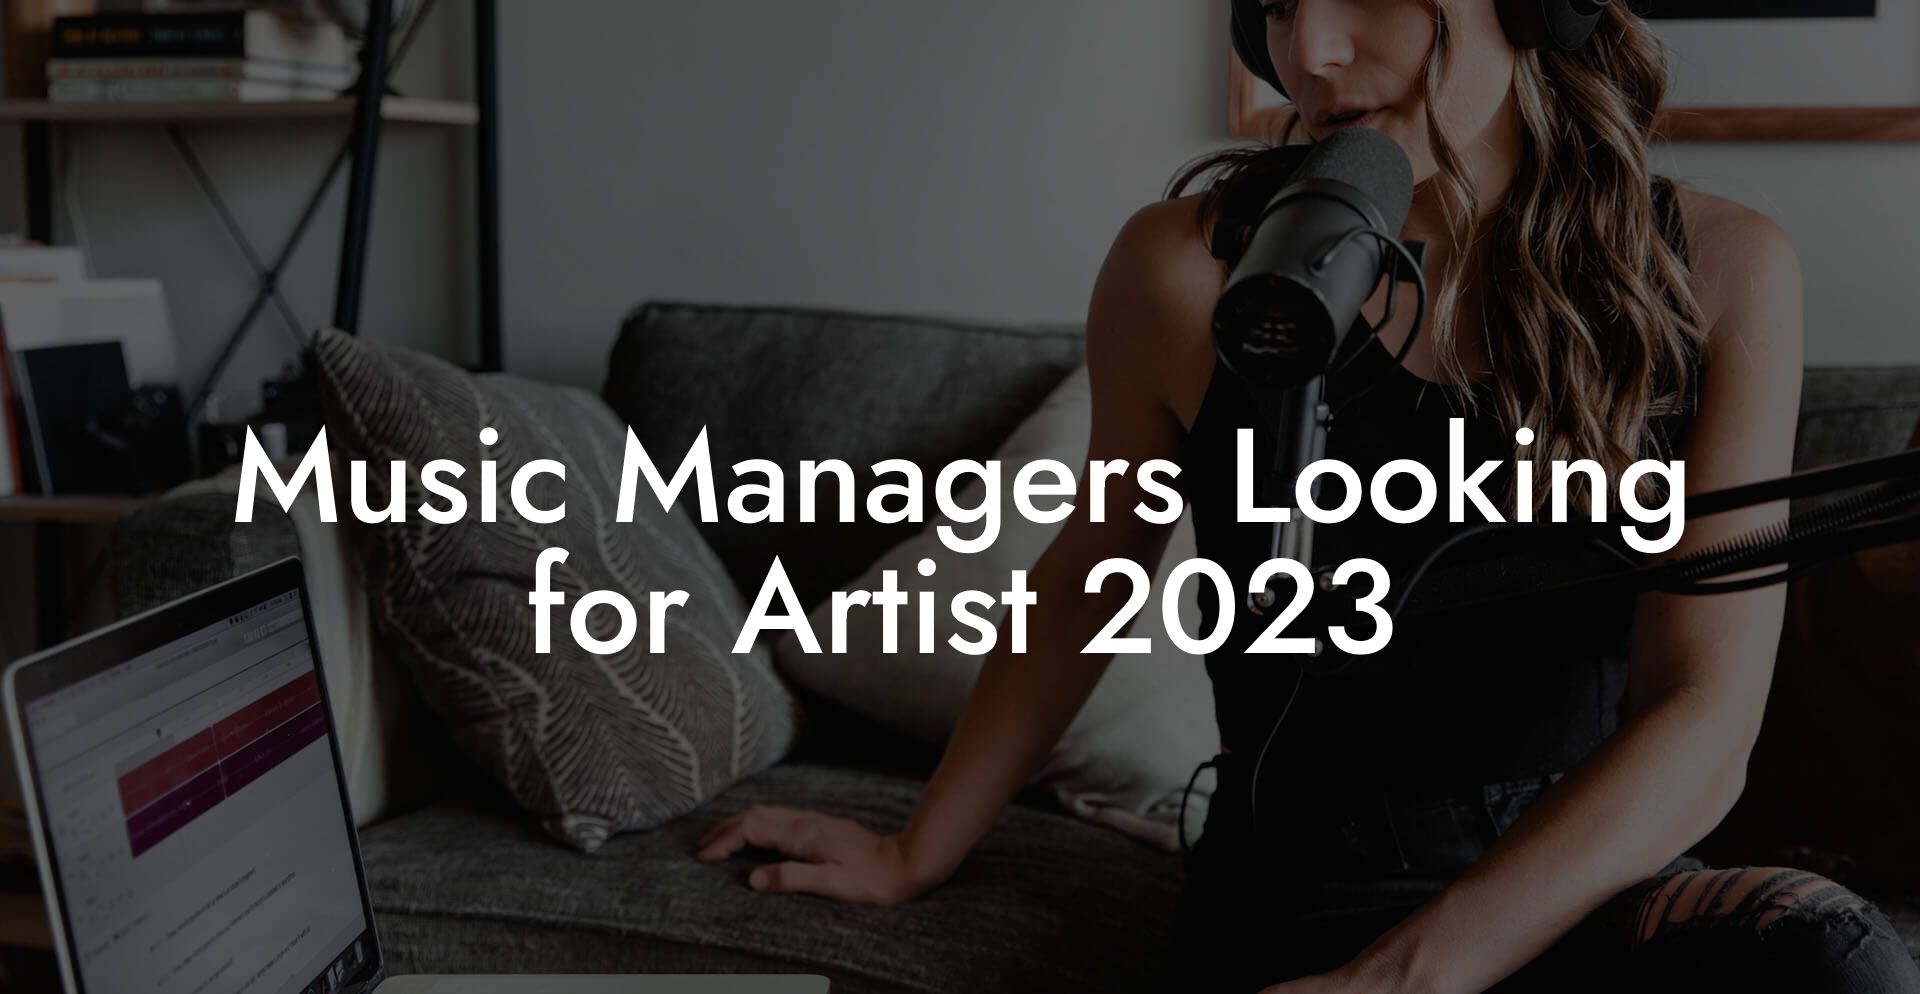 Music Managers Looking for Artist 2023